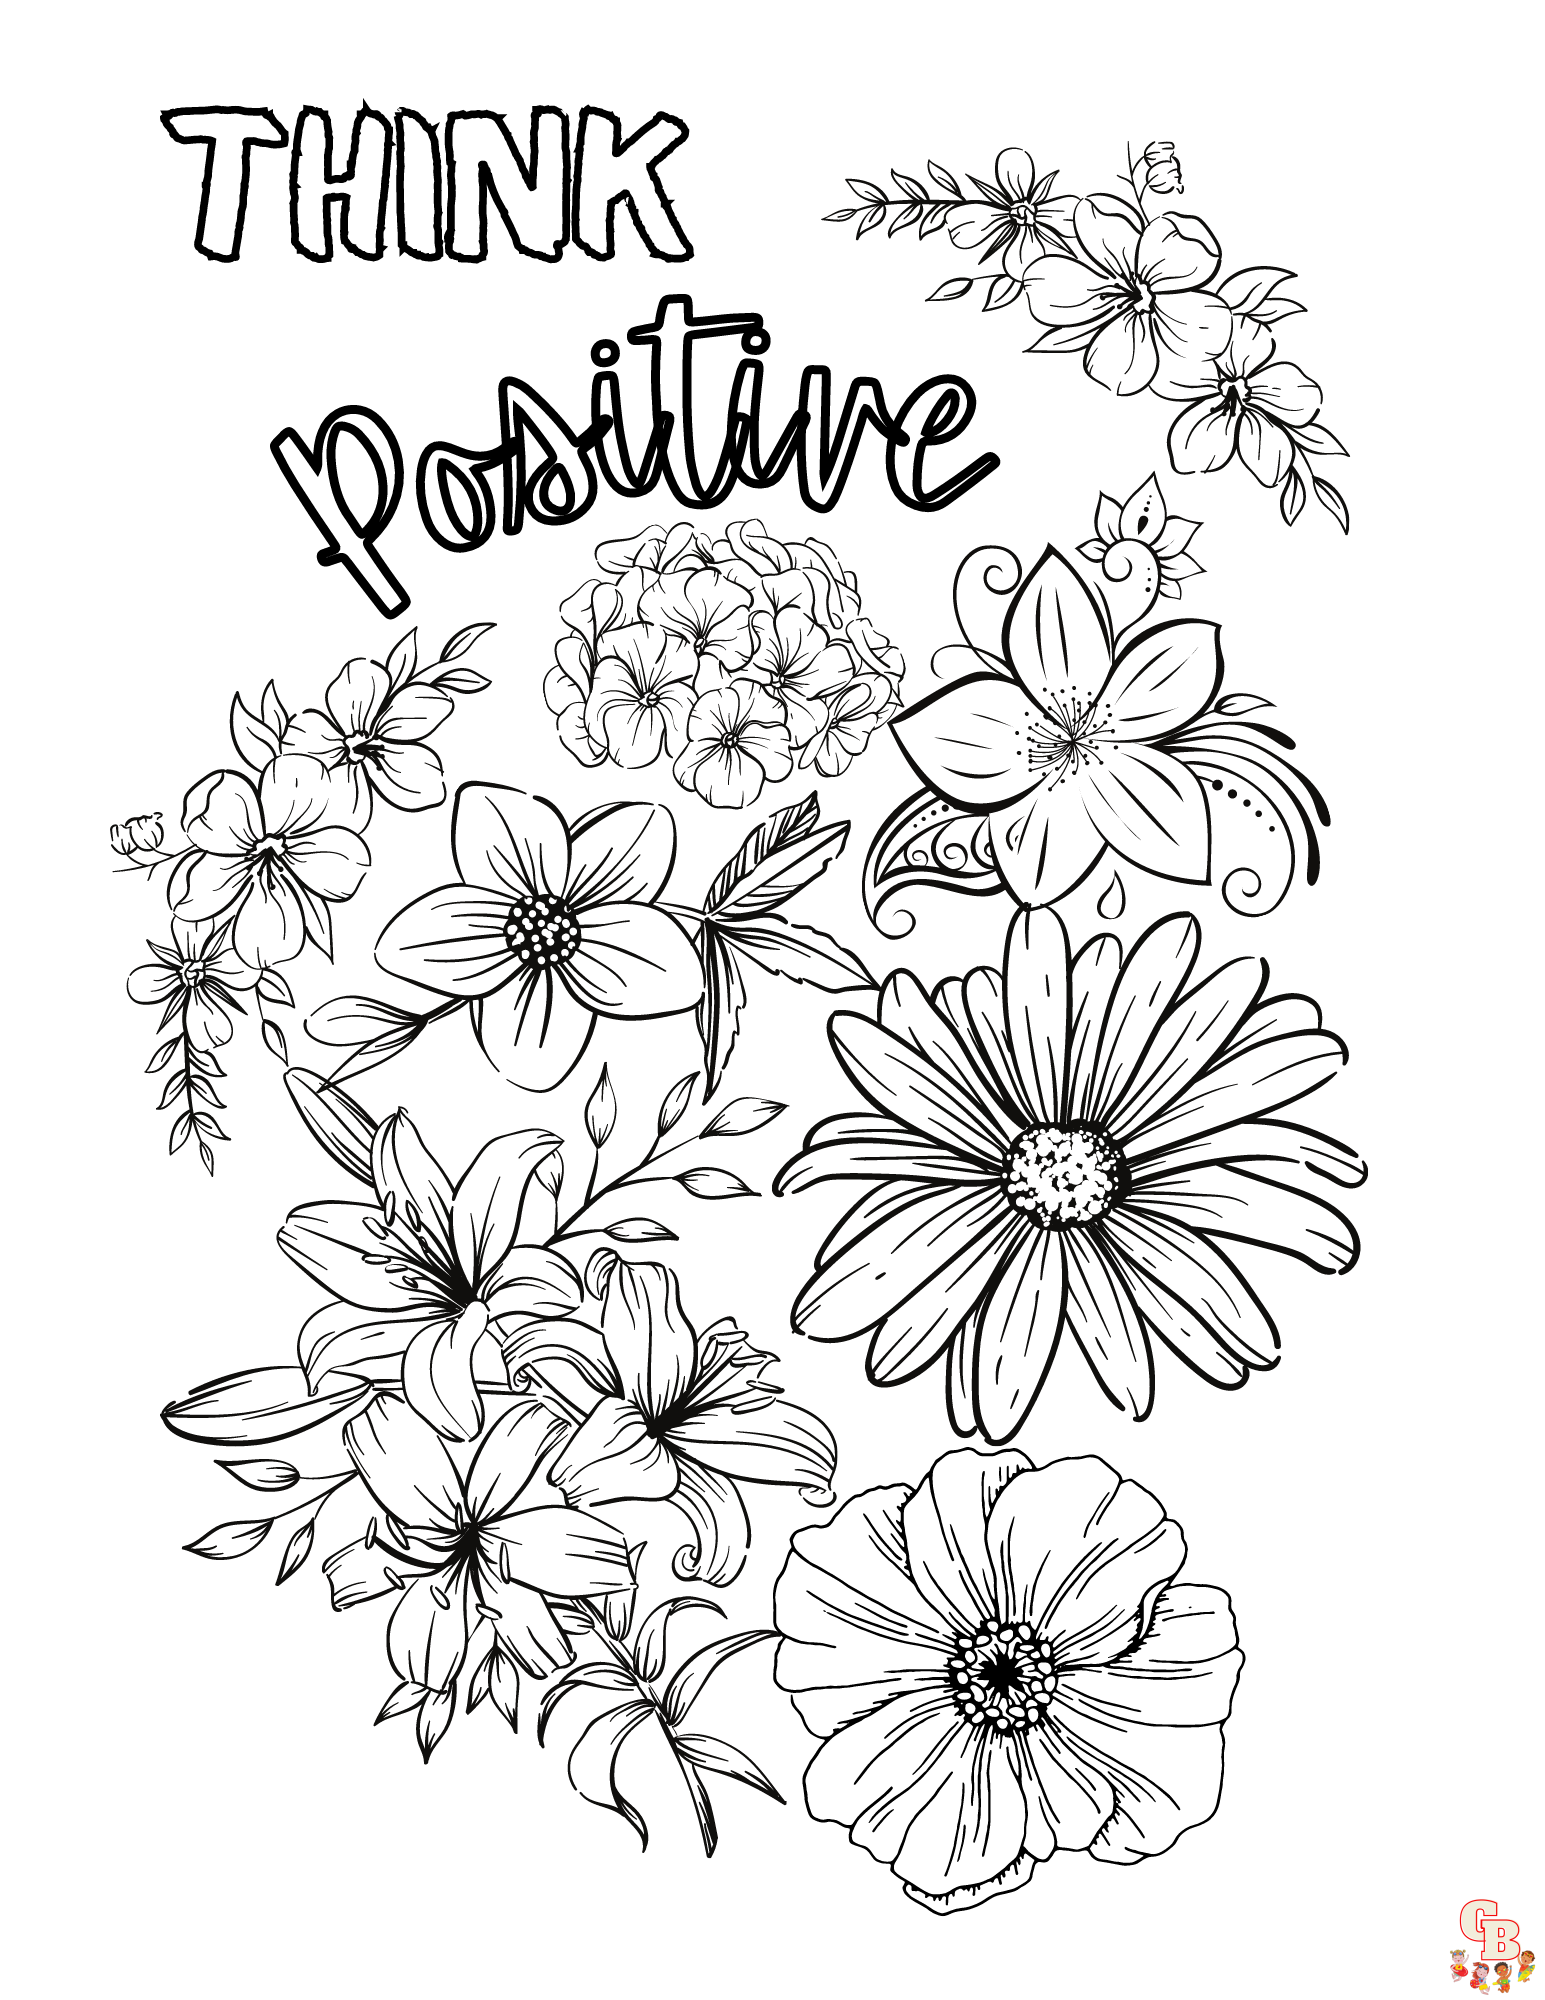 Positive Coloring Pages 1